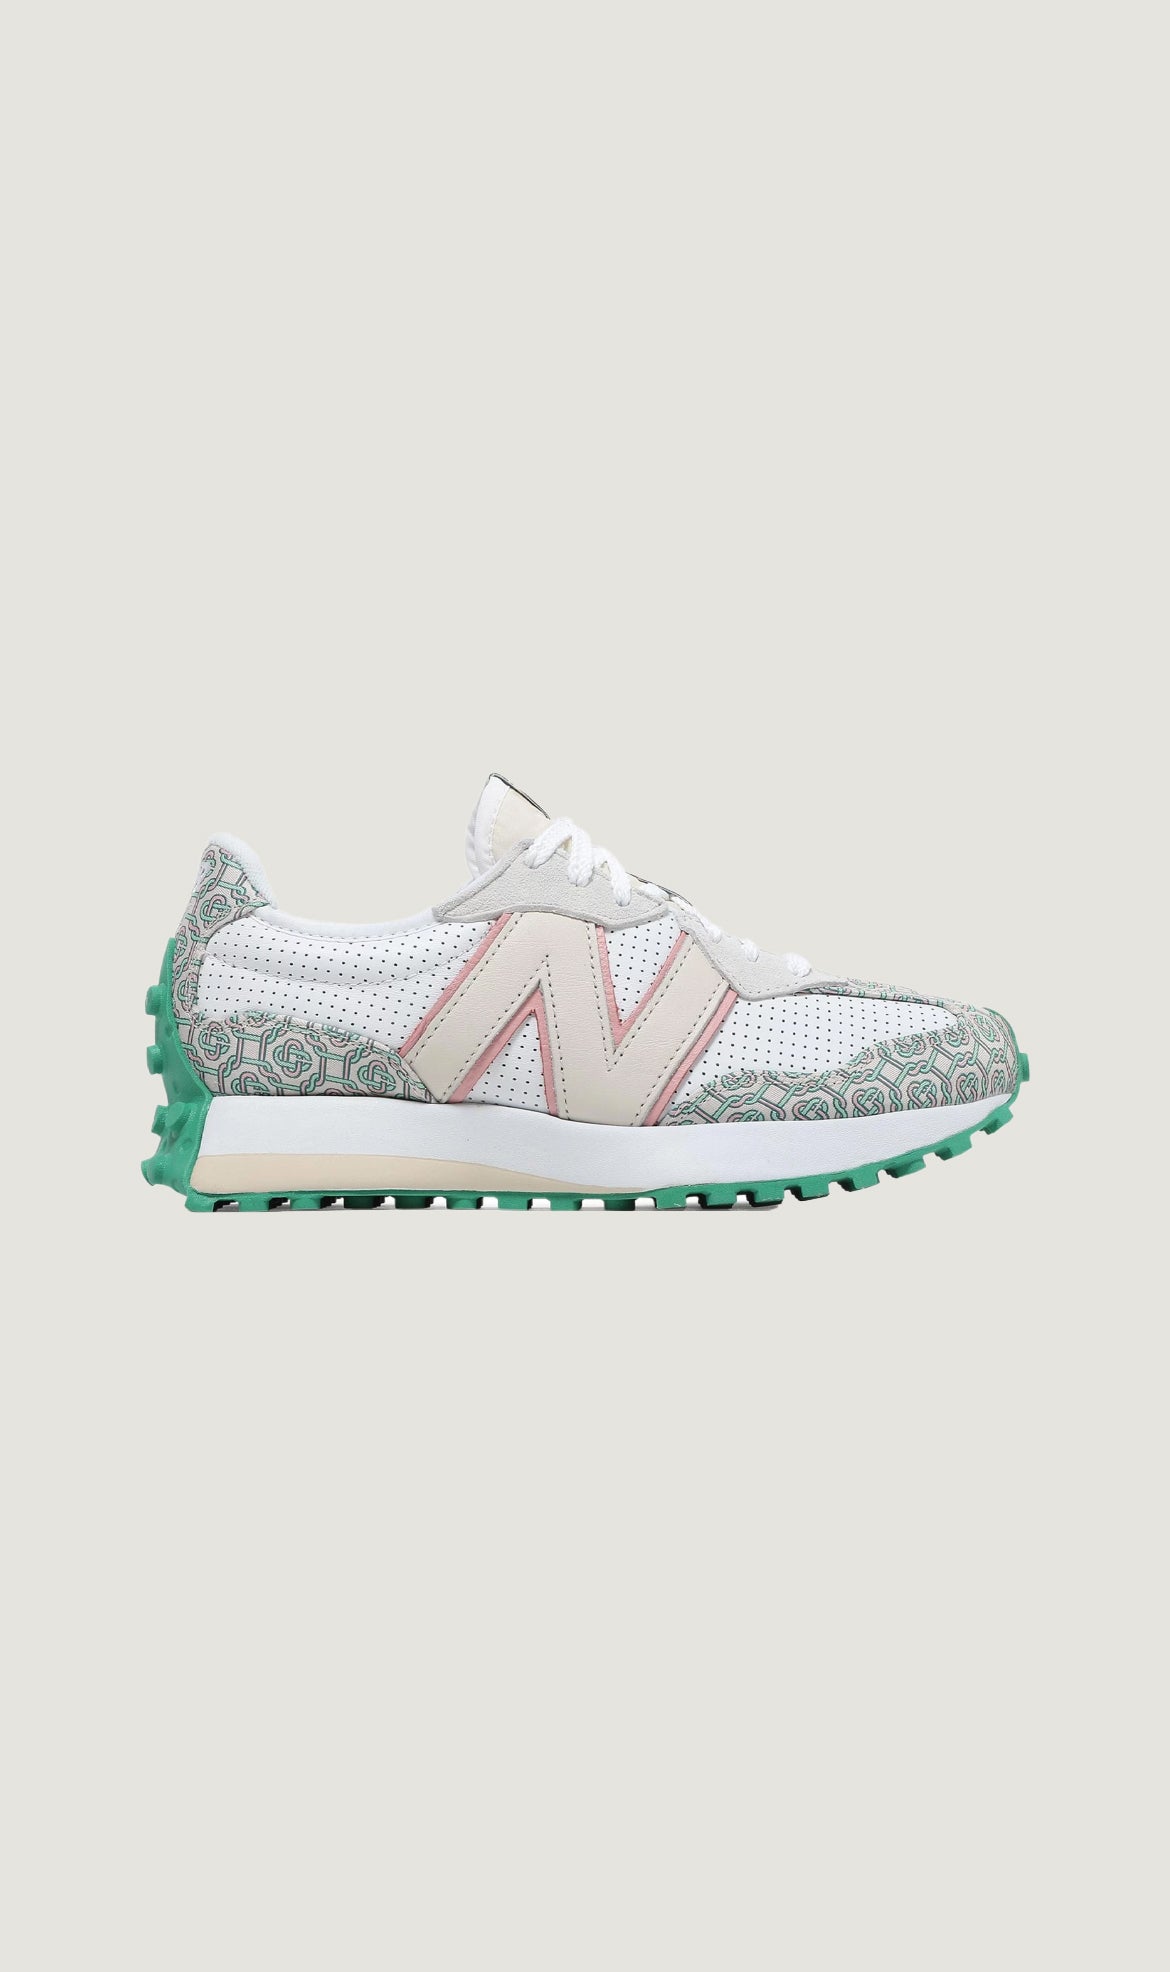 Load image into Gallery viewer, NEW BALANCE CASABLANCA X 327 - MUNSELL WHITE GREEN
